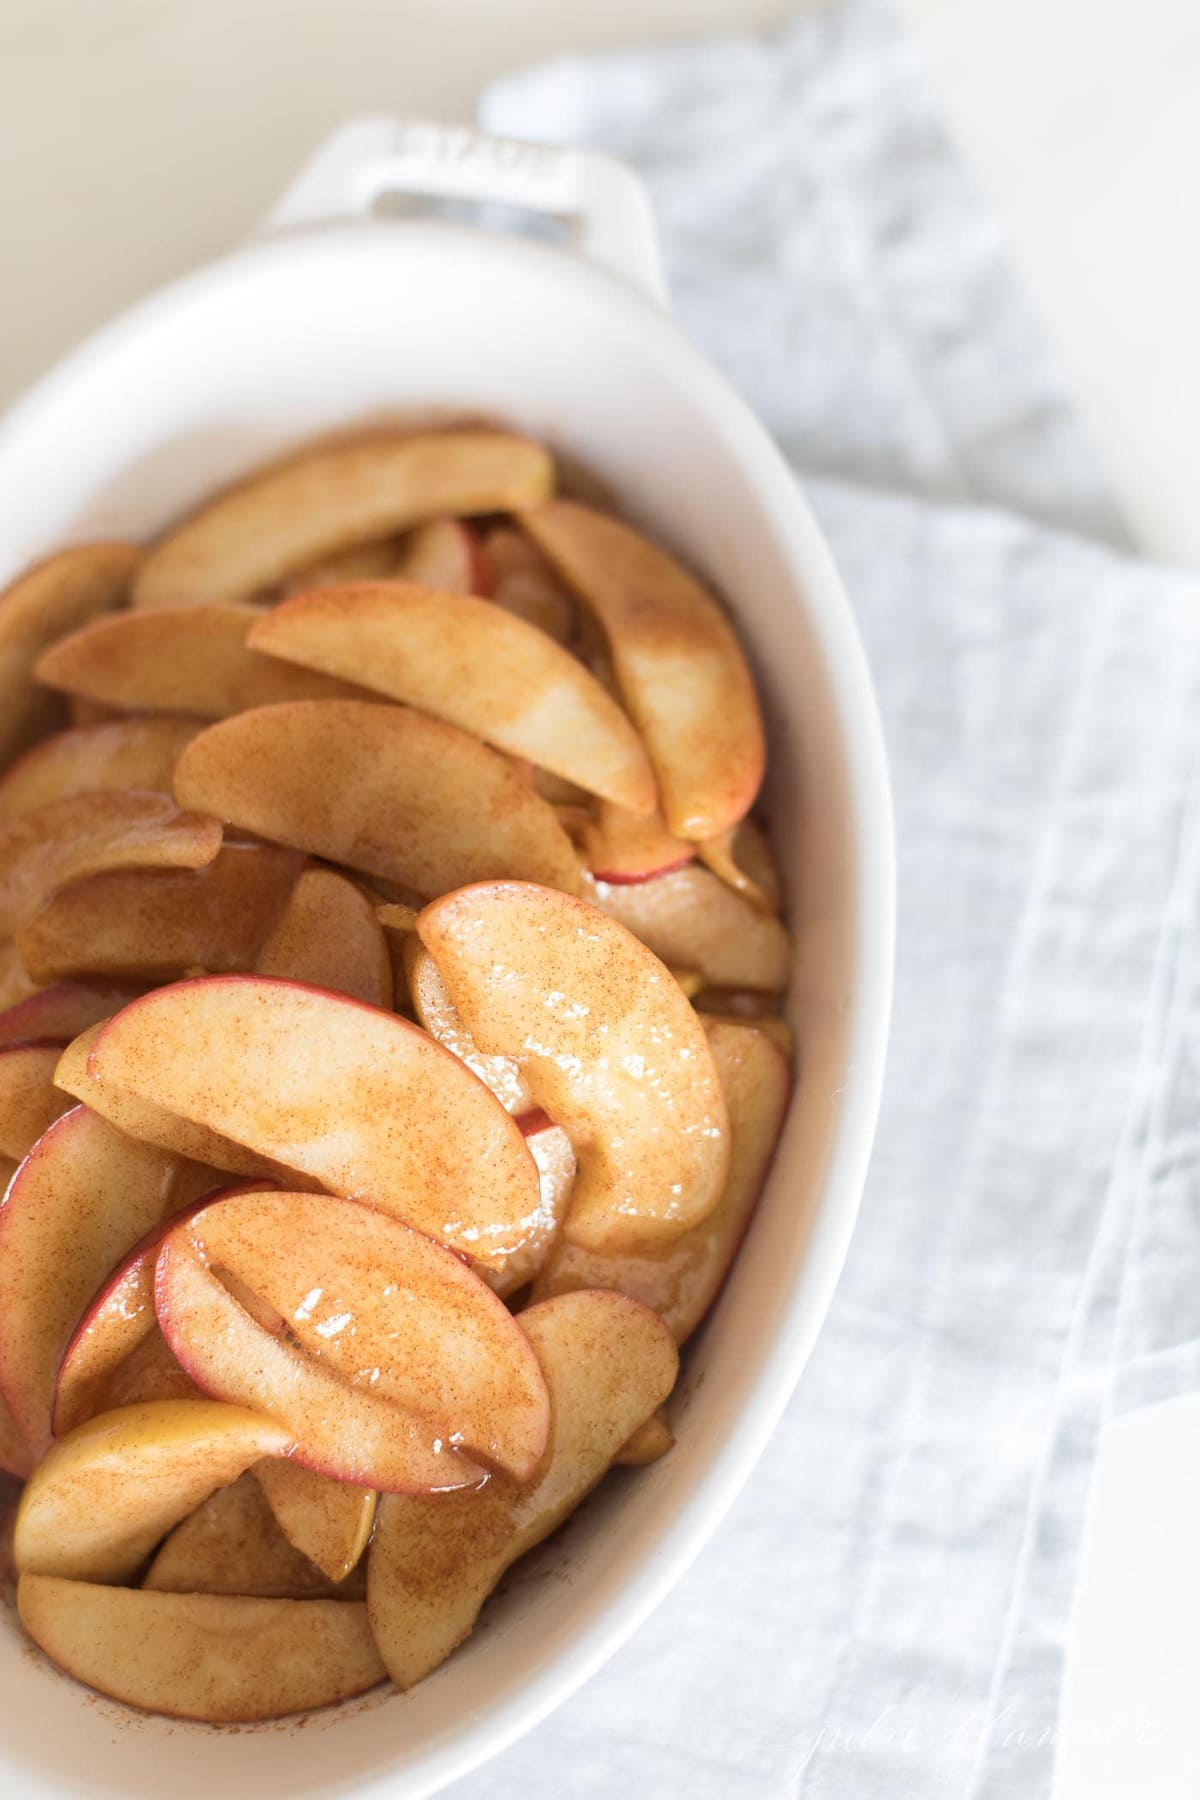 baked apple slices in white casserole dish